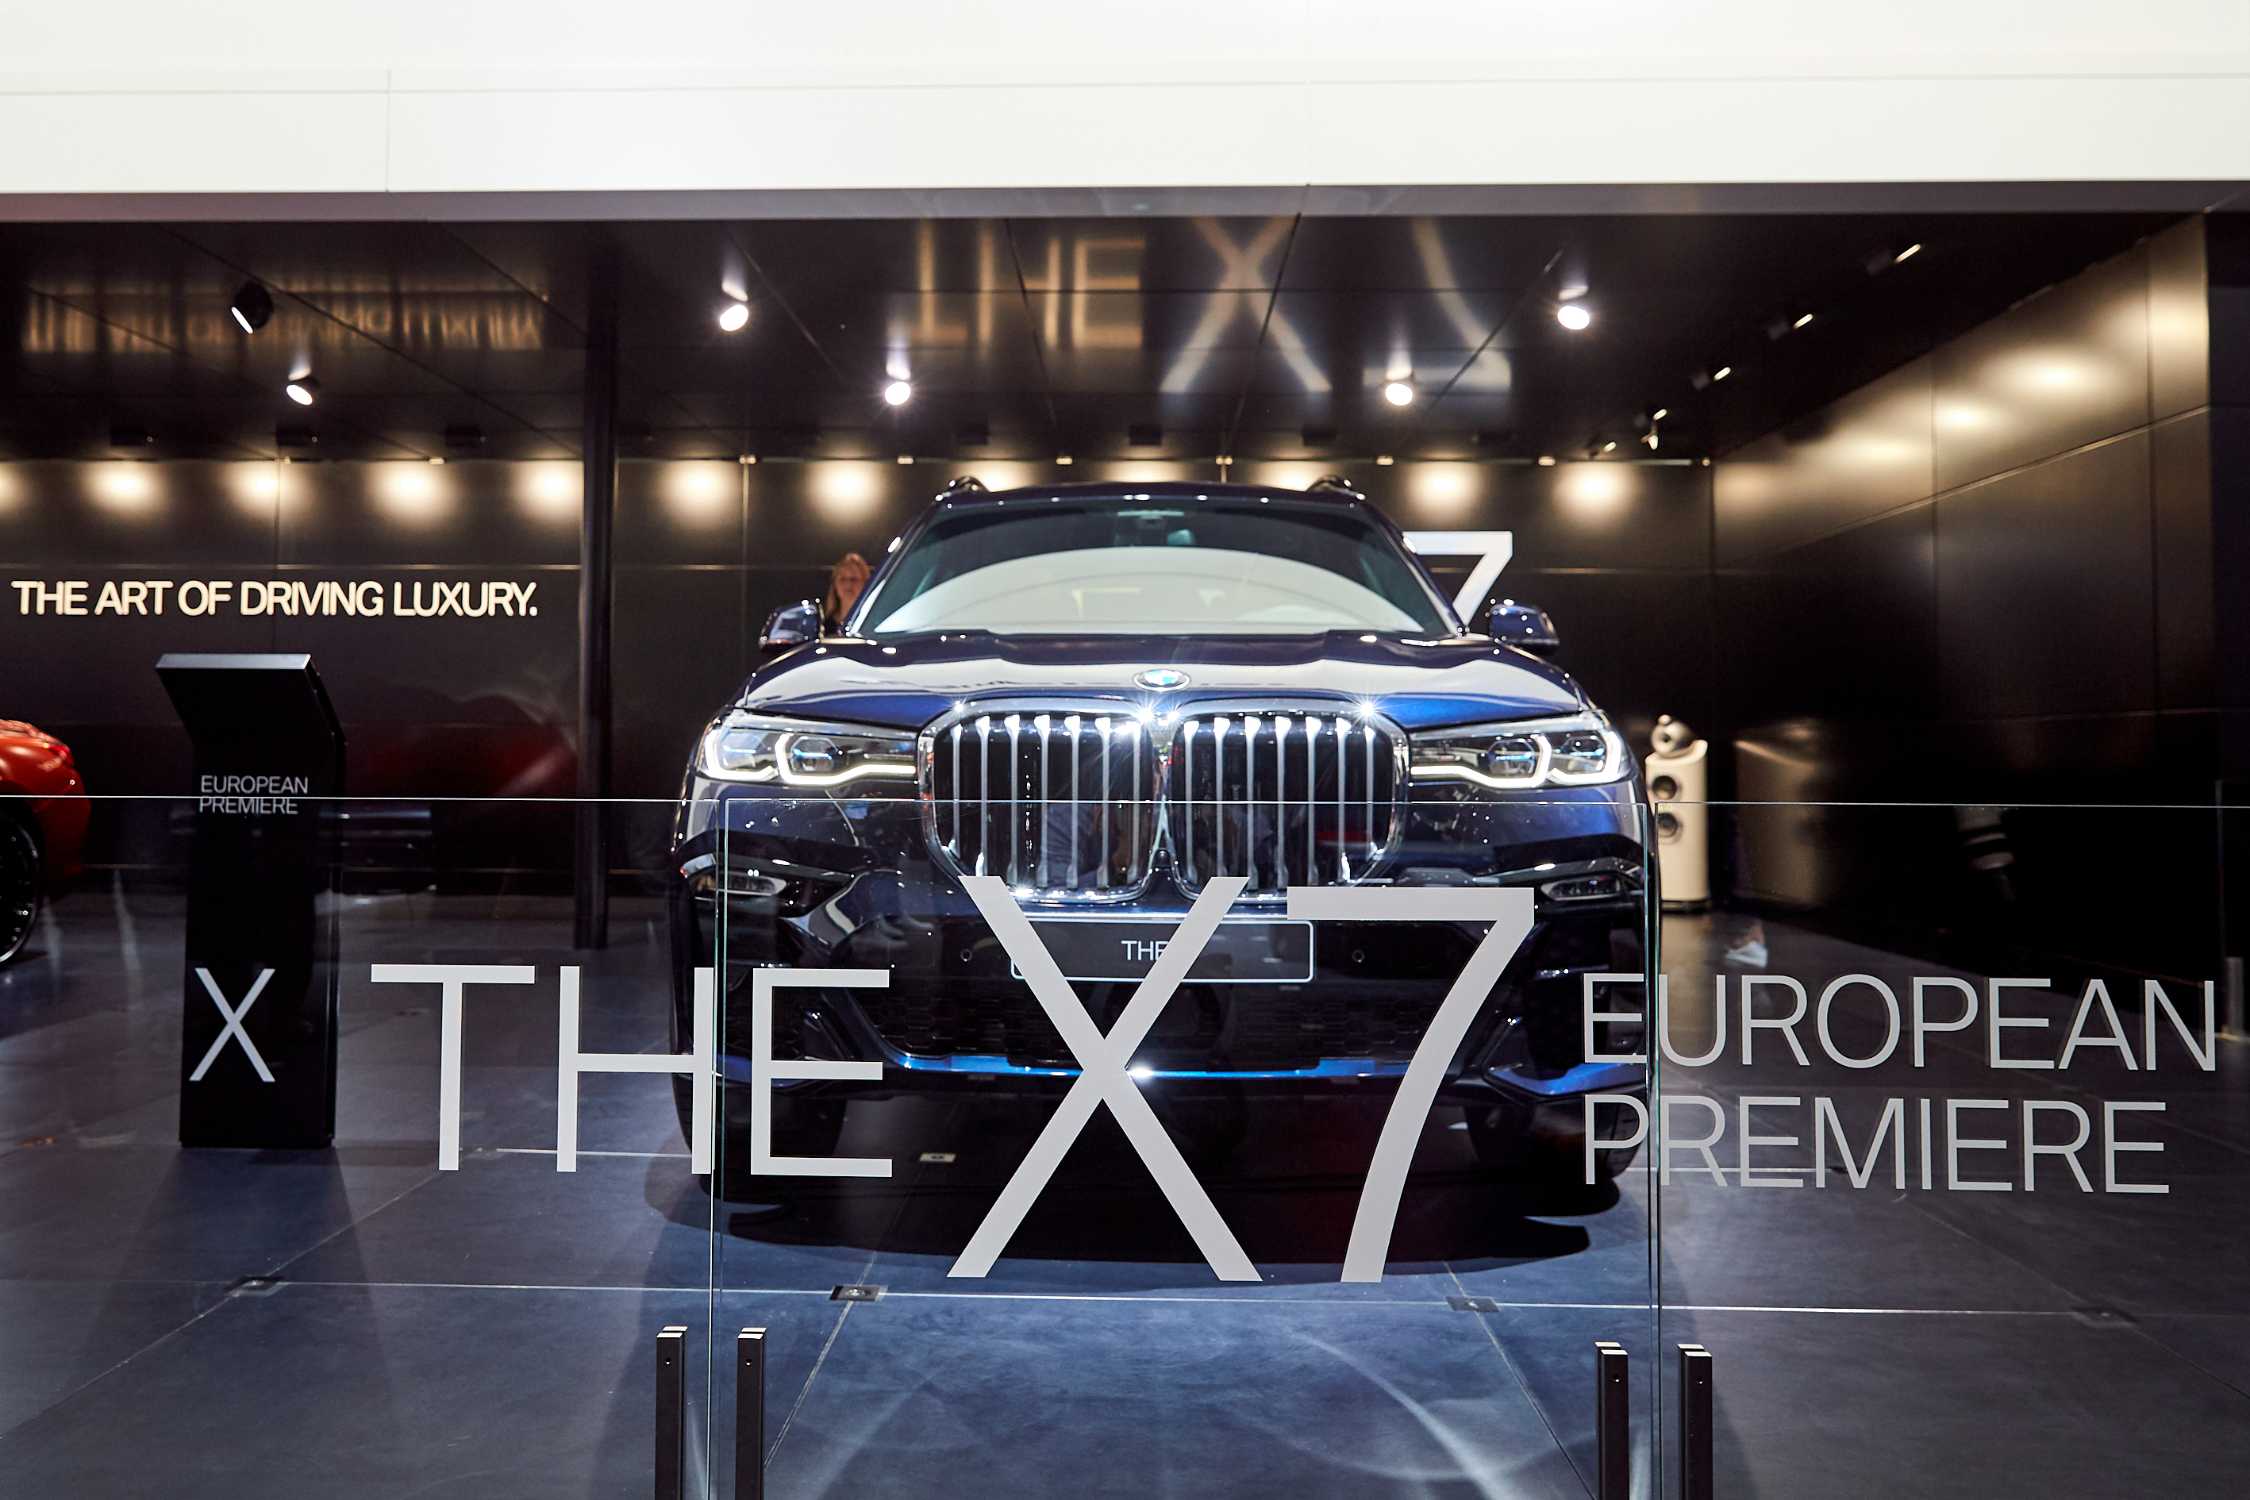 Brussels Motor Show 2019 - Press Conference BMW & MINI - Overview of 2018 - Outlook to 2019 - European premiere BMW X7 (01/2019)